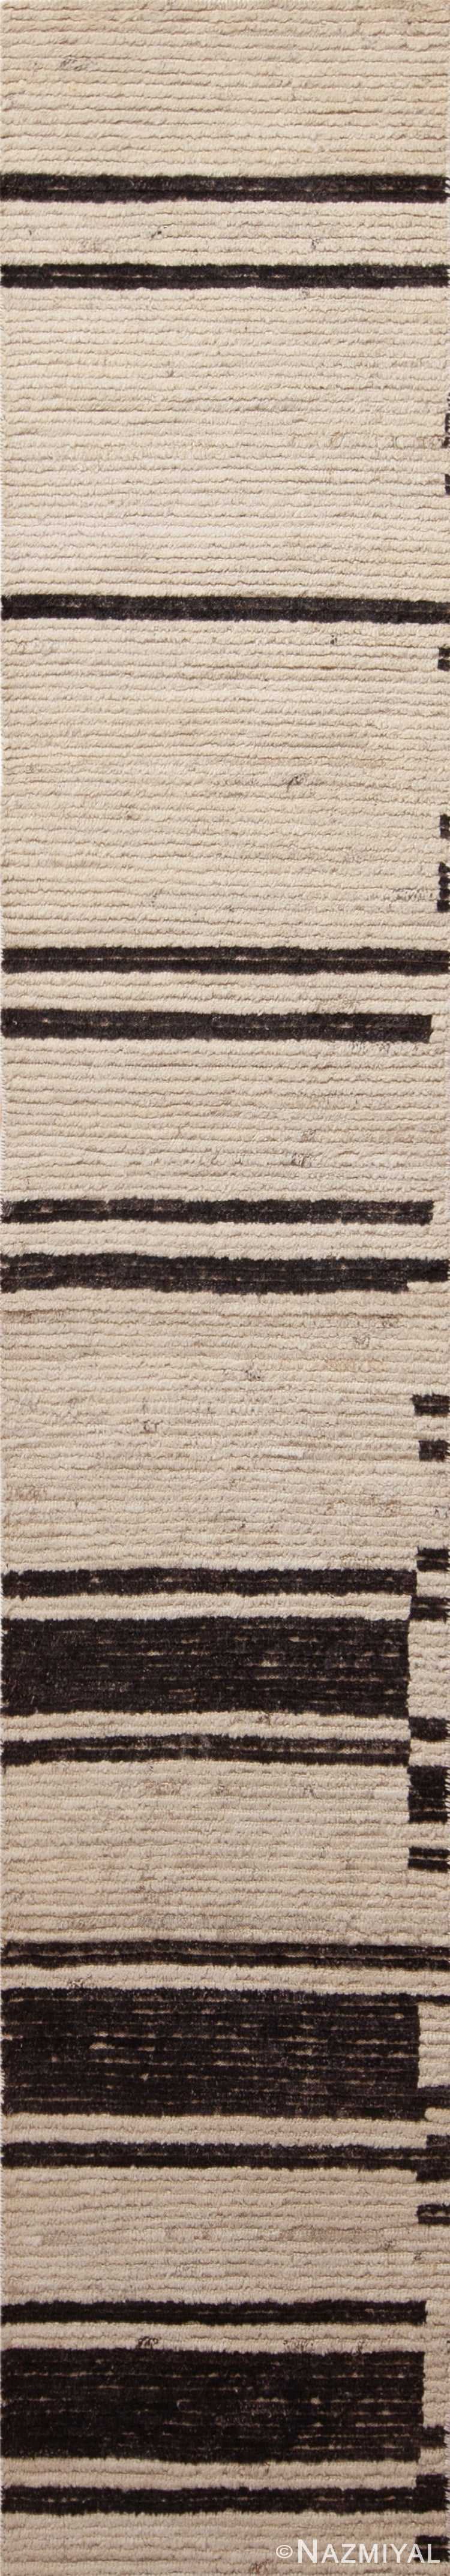 Minimalist Primitive Pattern Cream and Charcoal Color Modern Hallway Runner Rug 11881 by Nazmiyal Antique rugs